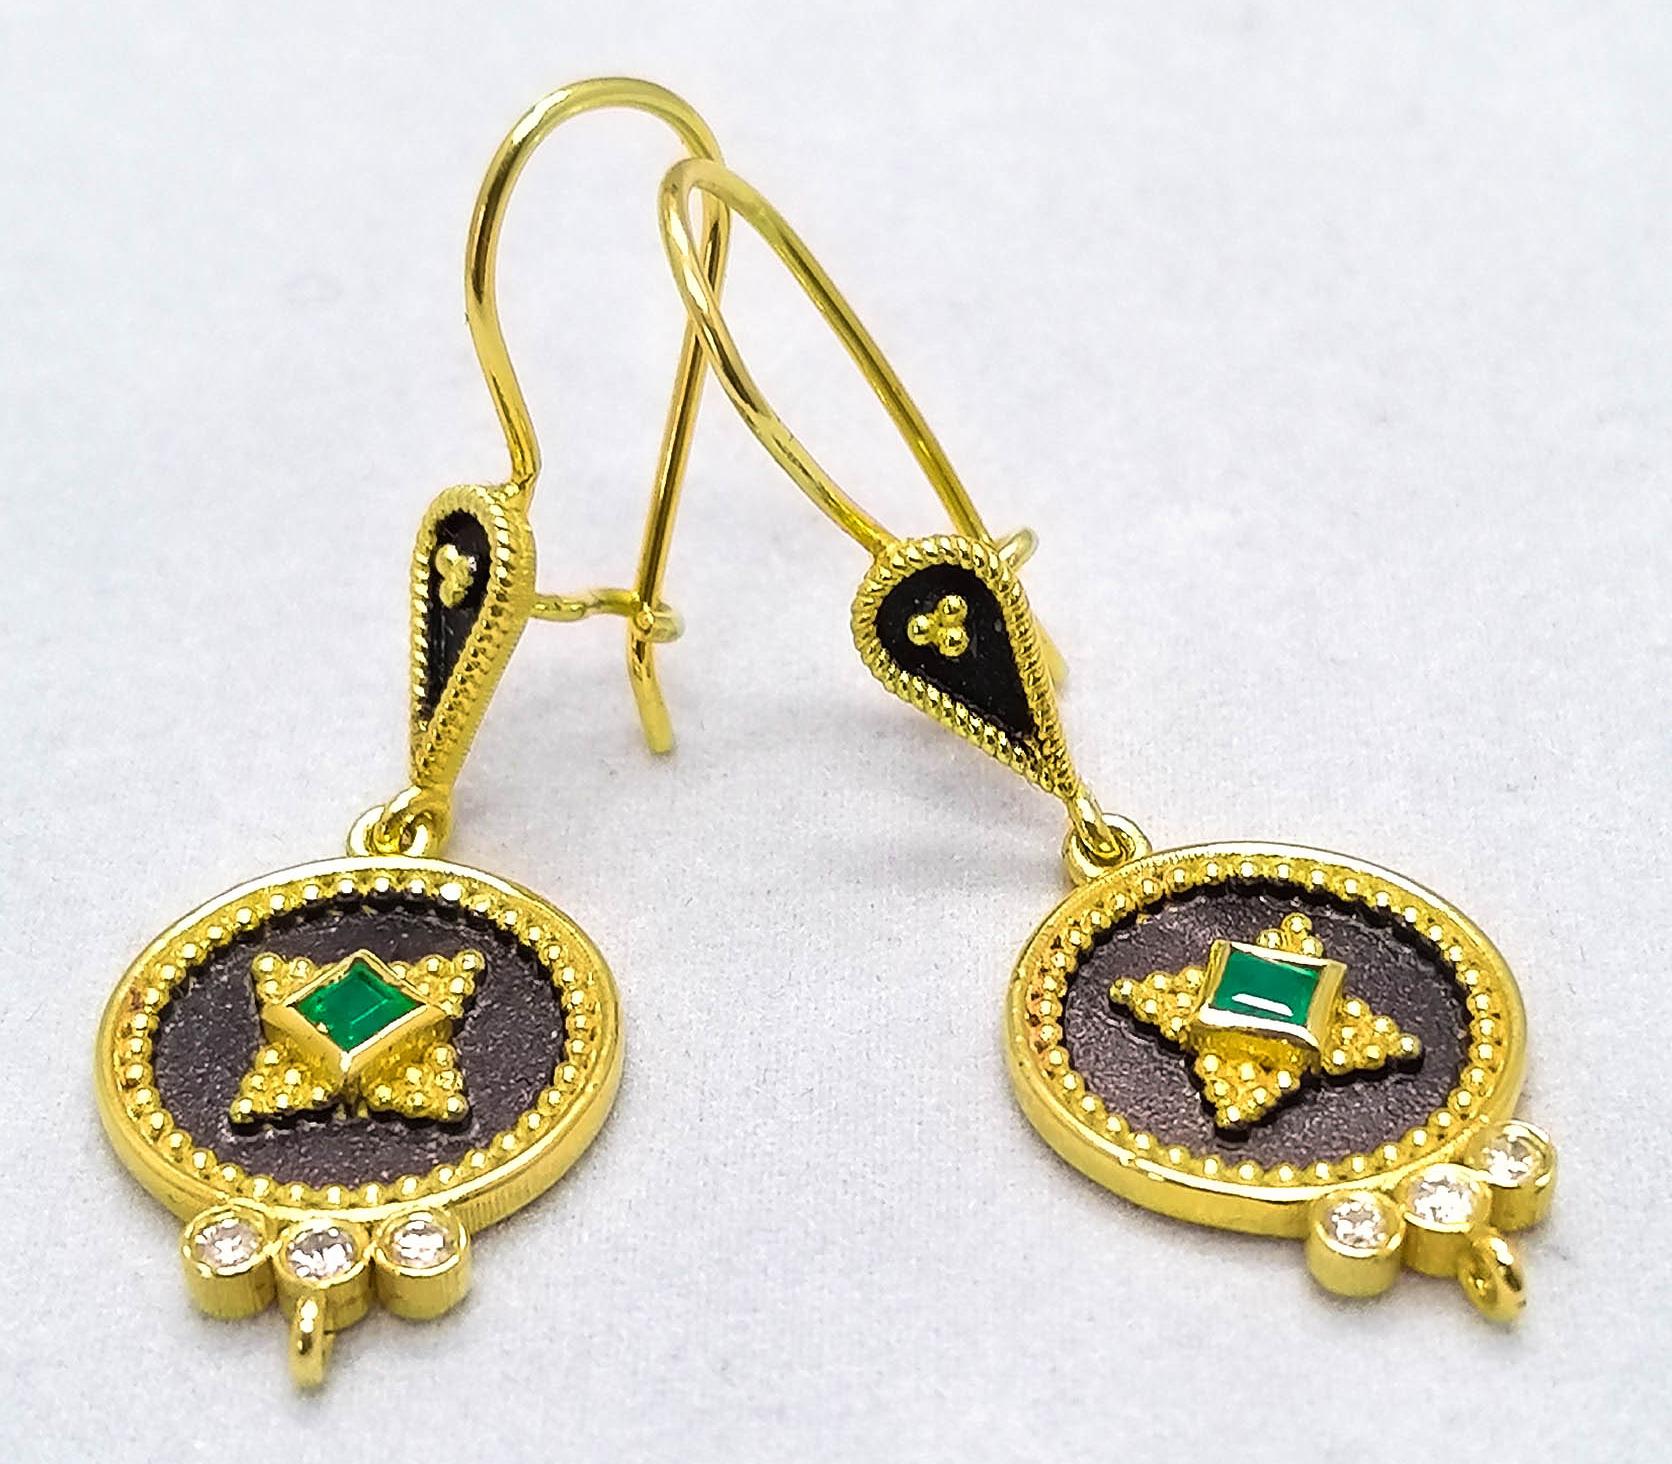 These S.Georgios 18 Karat Yellow Gold designer earrings are decorated with hand made Byzantine-era style bead granulation workmanship done under a microscope, and finished with a unique velvet background and Black Rhodium giving them a stunning